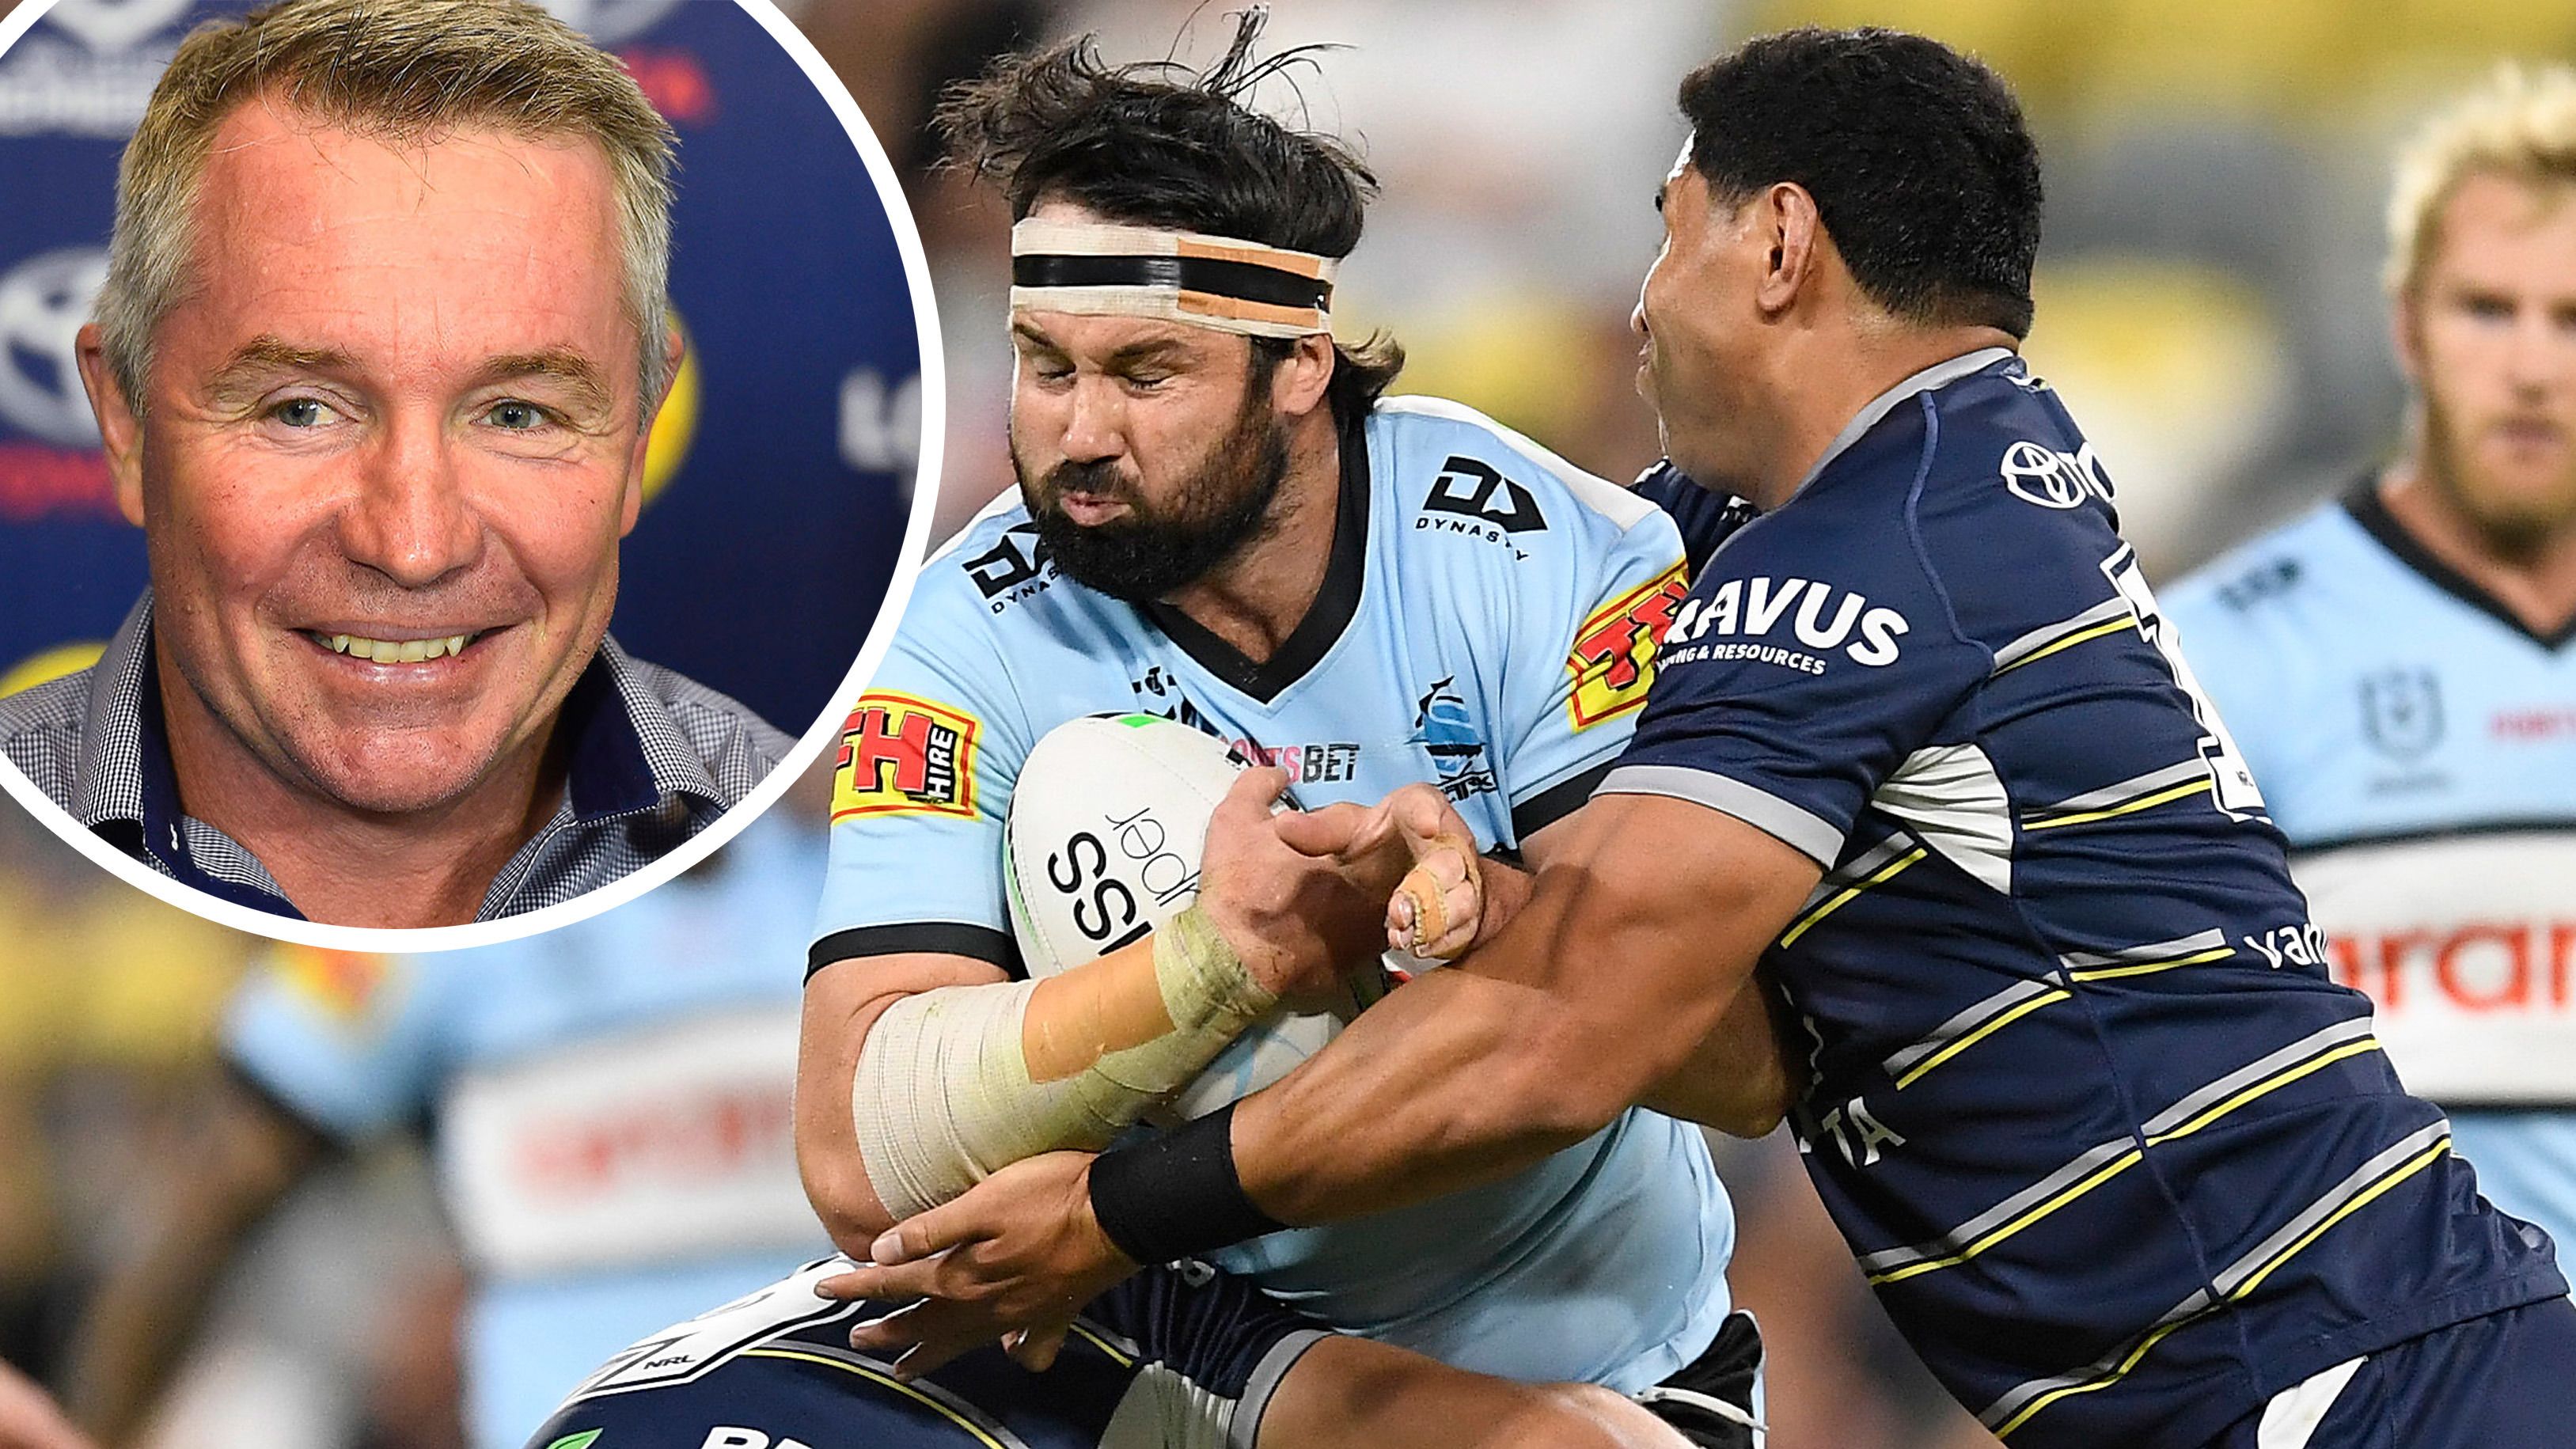 Man of the match award for Cowboys-Sharks clashes to be named in honour of Paul Green